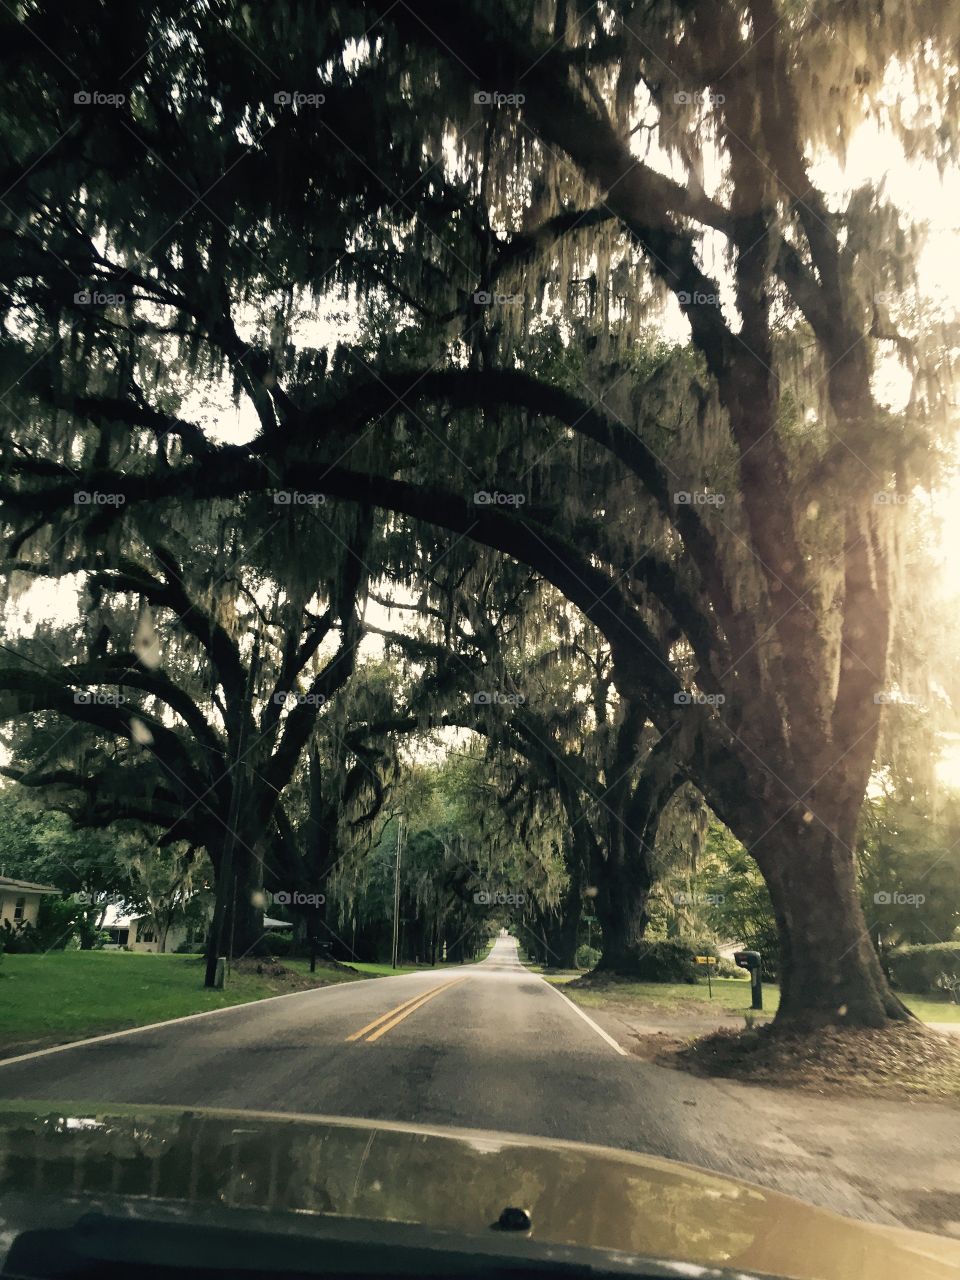 Live oaks in FL. Live oaks driving down the road in Floral City FL